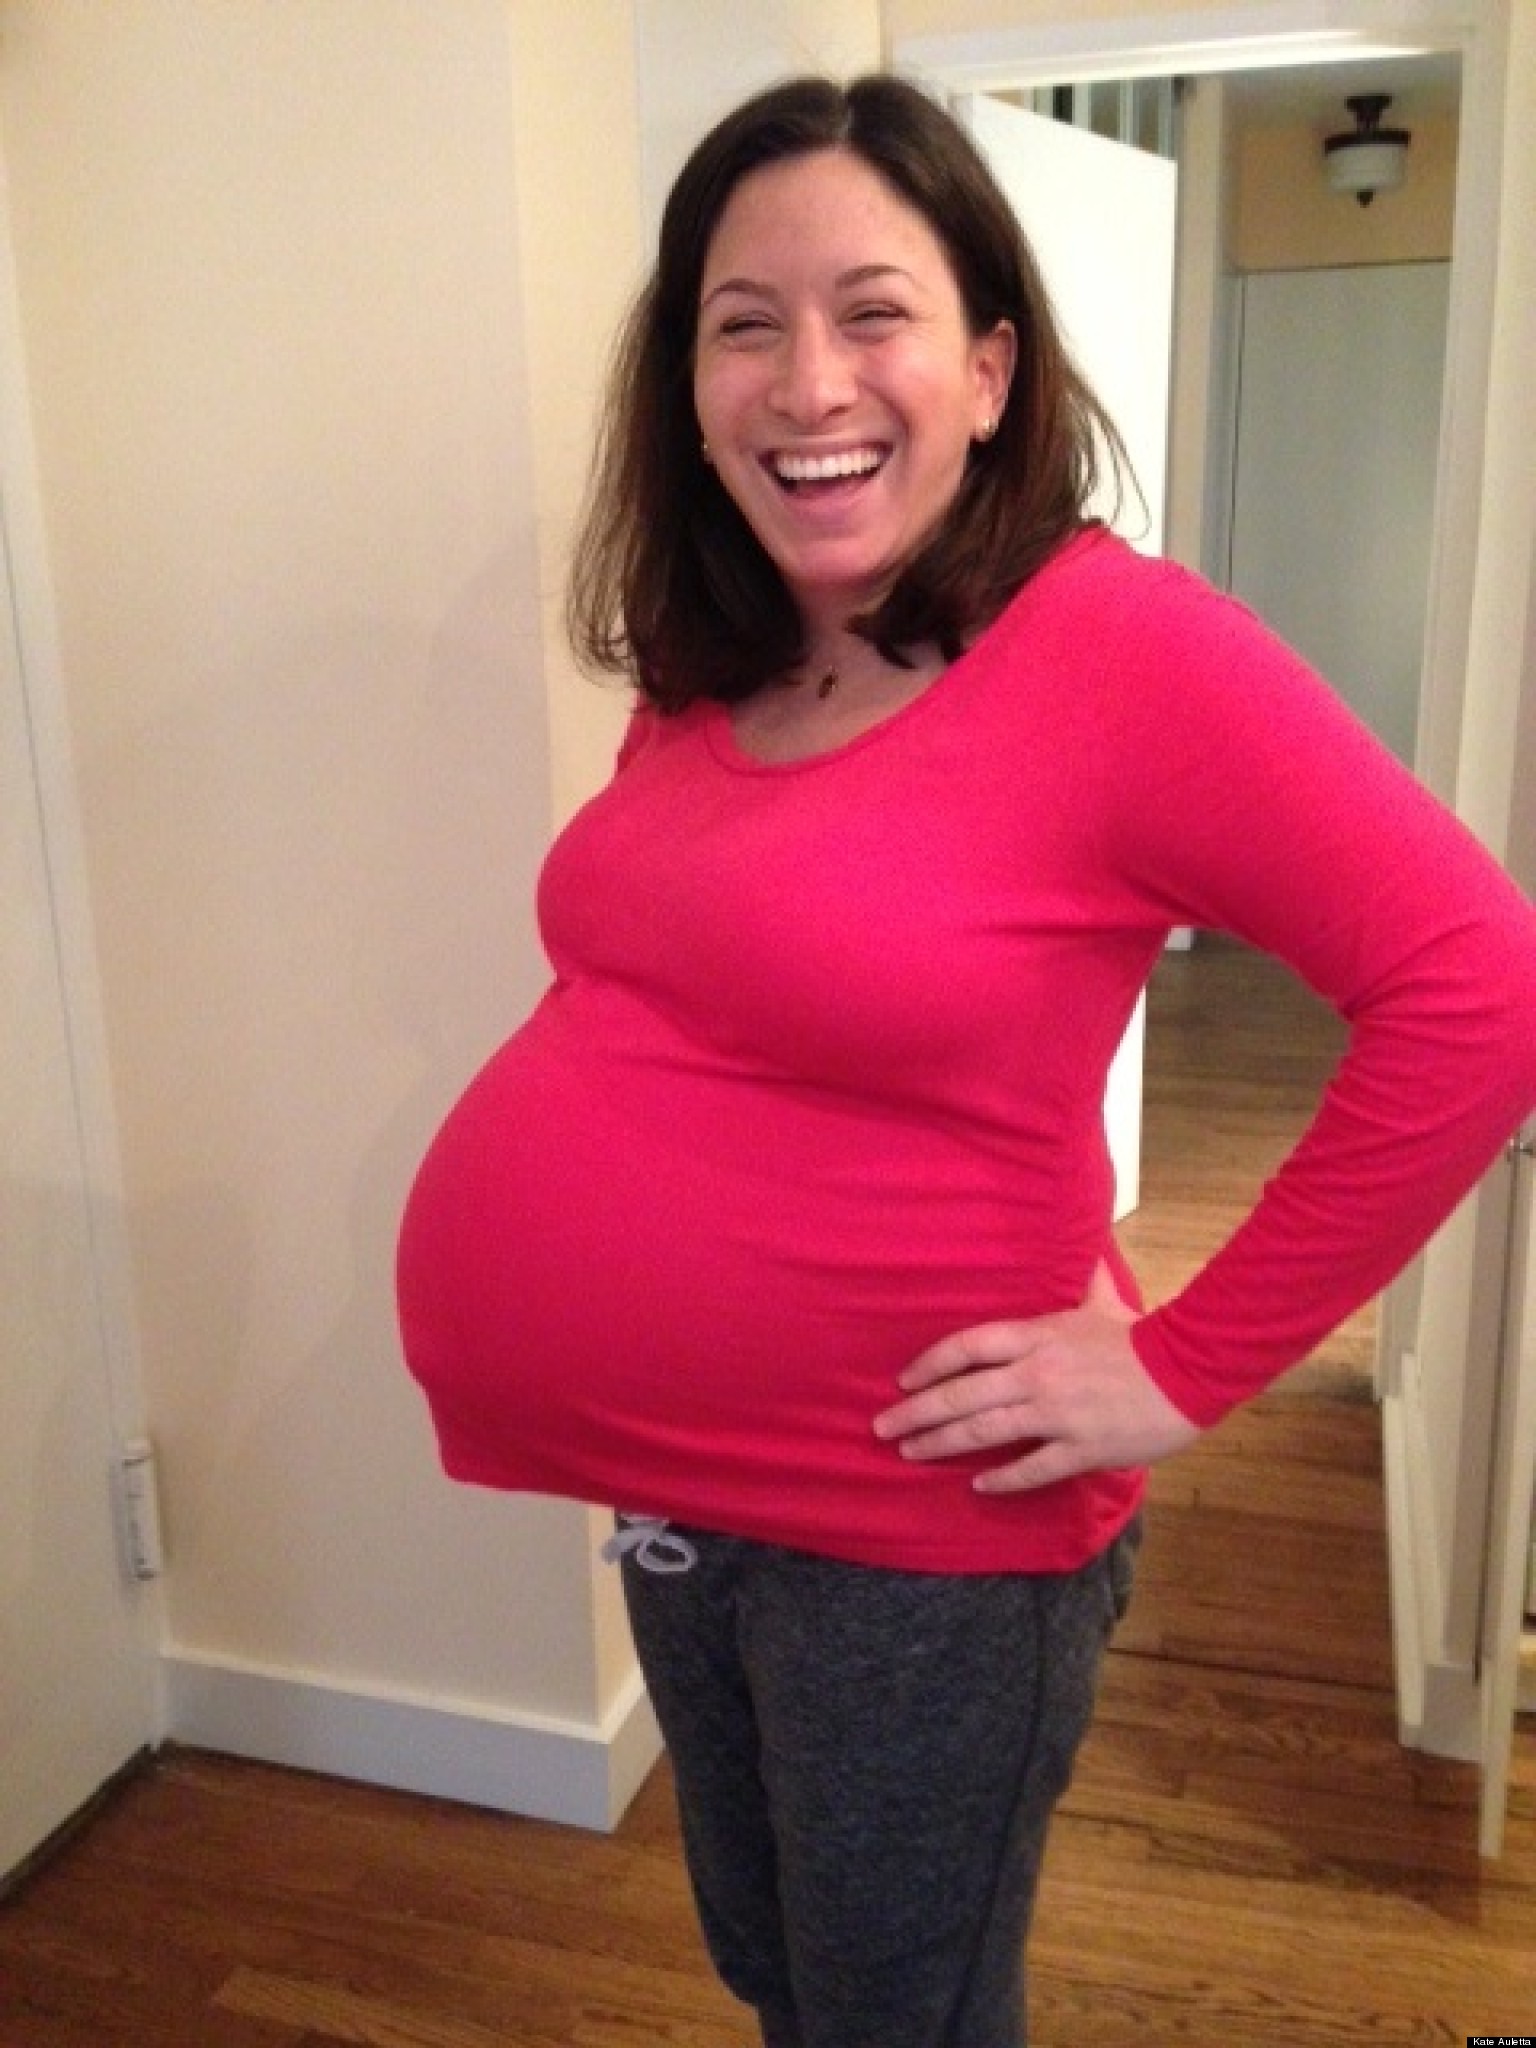 40 Weeks Pregnant And Counting: A Journal Of A Crazy ...